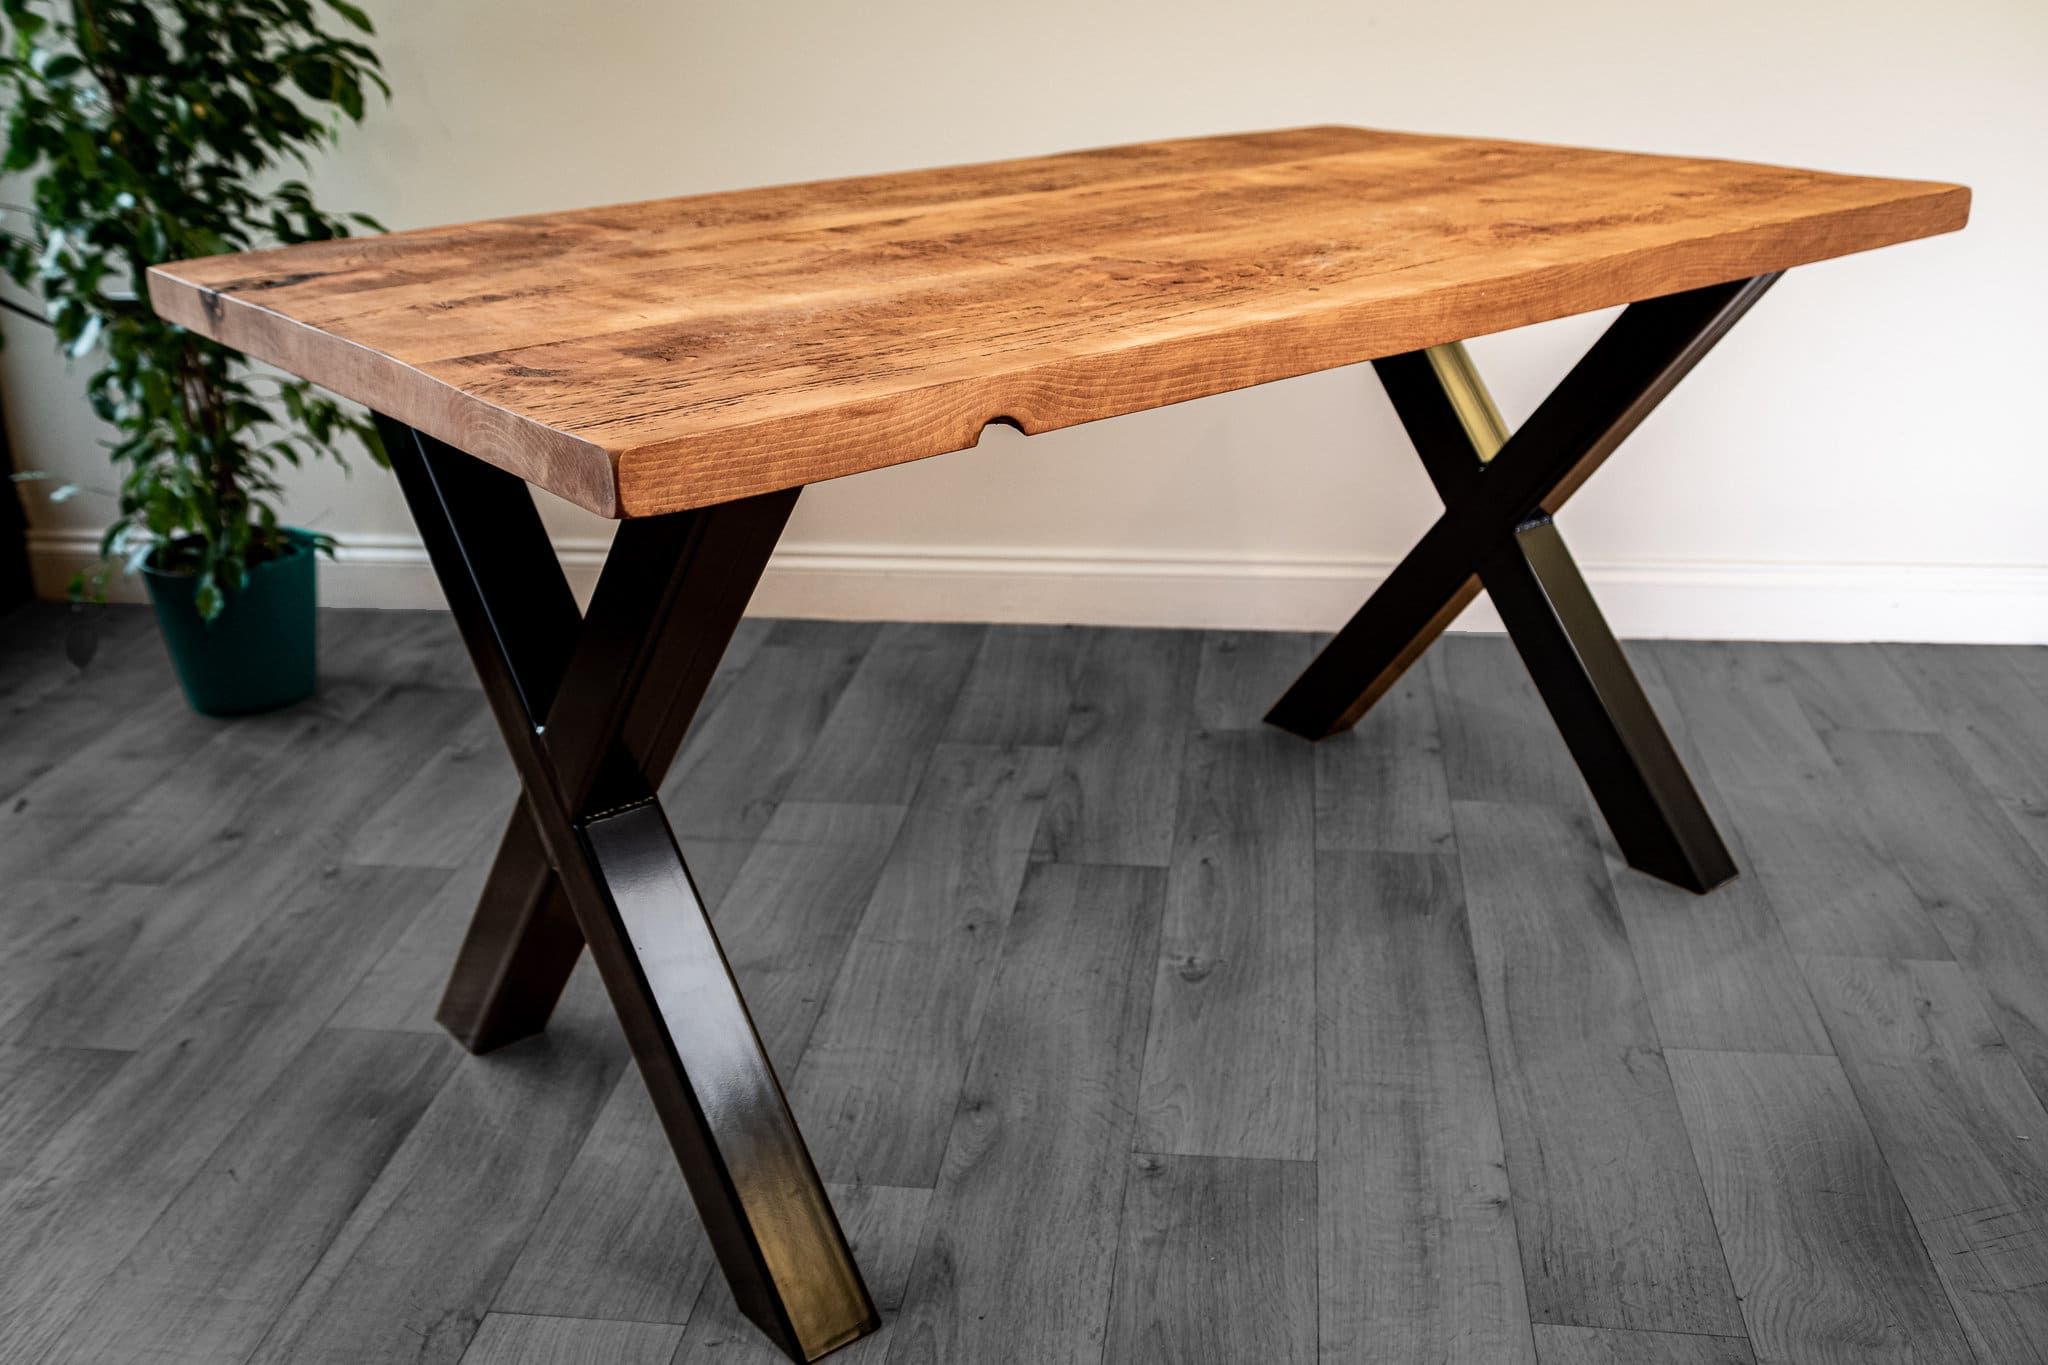 The Chunky Solid Wood Industrial X Frame Dining Table In Recent Dark Oak Wood Dining Tables (View 17 of 20)